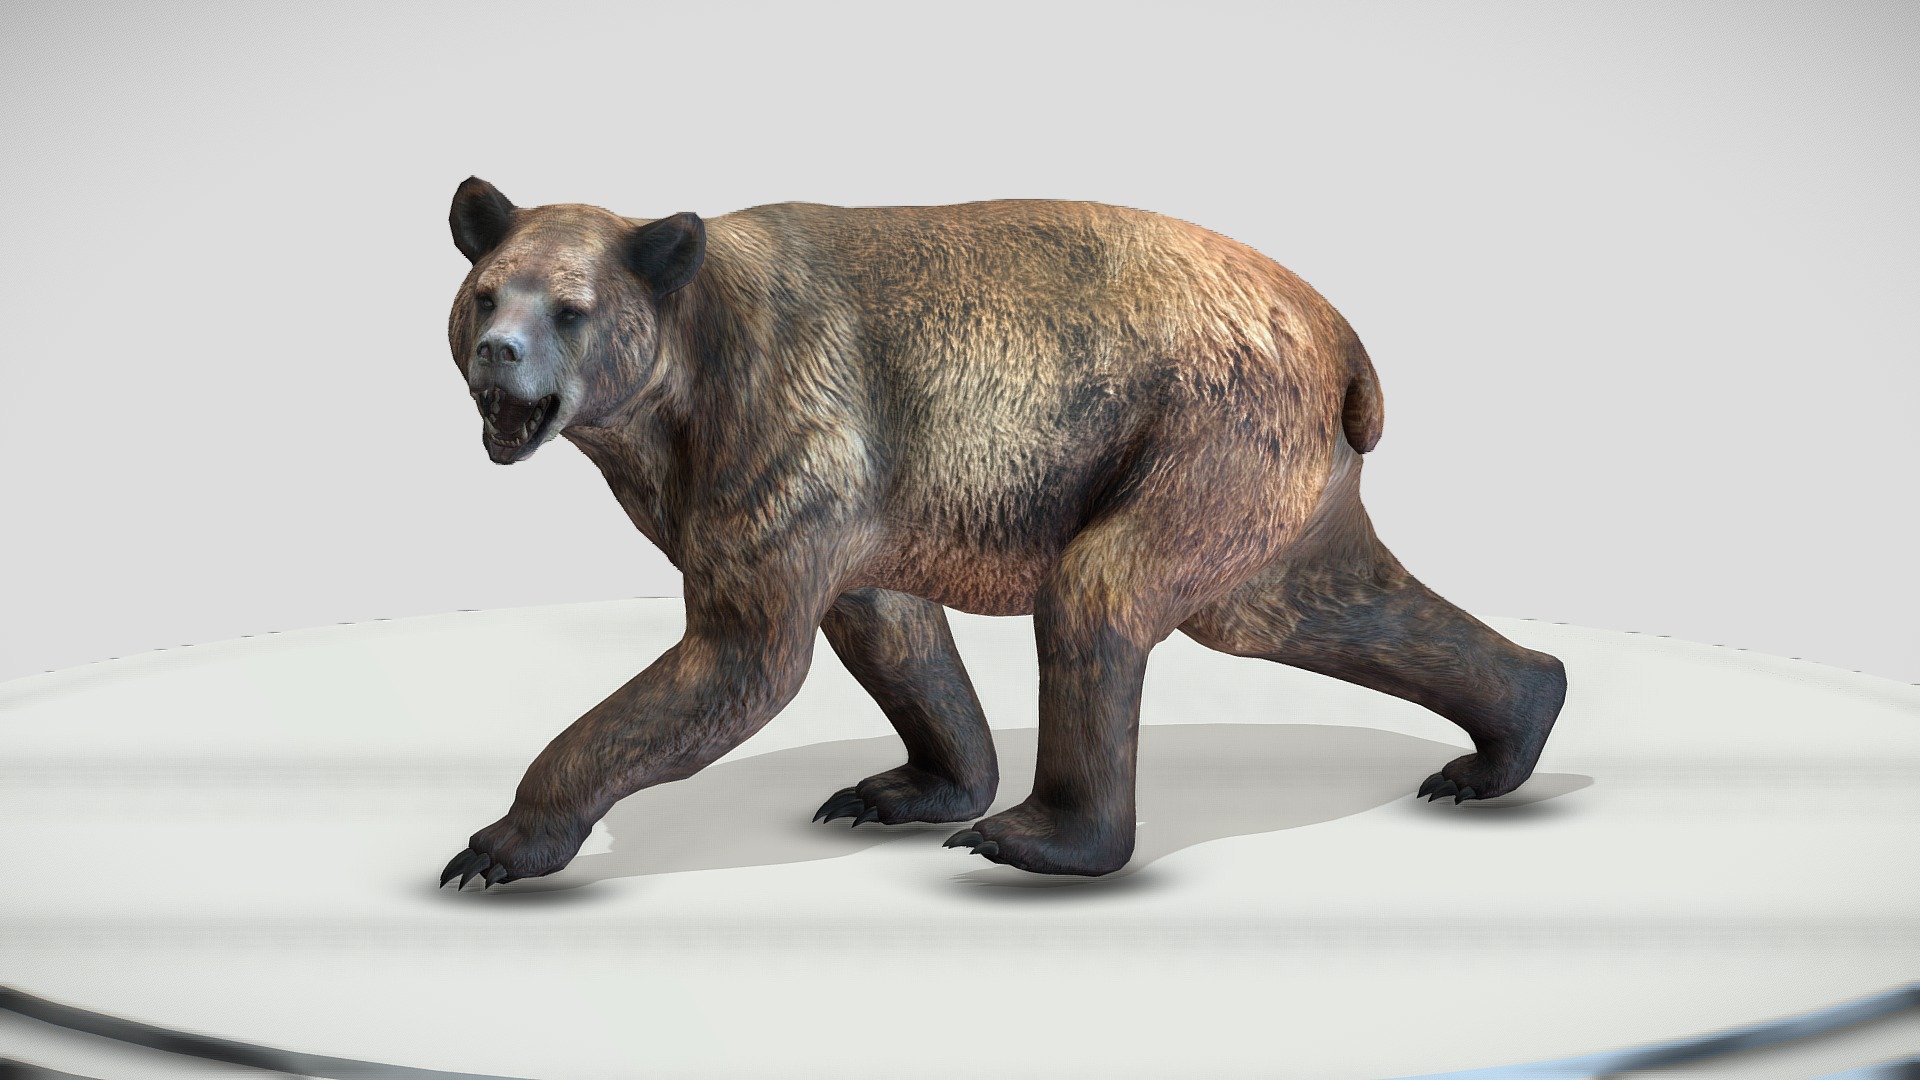 Arctodus 3D sculpt
Arctodus, commonly known as the short-faced bear, was a remarkable genus of bear that existed during the Pleistocene epoch, approximately 1.8 million to 11,000 years ago. Members of this genus, such as Arctodus simus, were among the largest terrestrial mammalian carnivores ever to roam North America.

Arctodus was characterized by its distinctive short and robust facial structure, which contributed to its common name. The shortened snout and large nasal openings are believed to be adaptations for enhanced respiratory efficiency, possibly aiding in cooling during periods of heightened activity. The limbs of Arctodus were also relatively long, suggesting adaptations for swift movement.

Recent studies have suggested that Arctodus had a diet more similar to that of today's ursids, that is, a primarily omnivorous diet that included the consumption of carrion 3d model